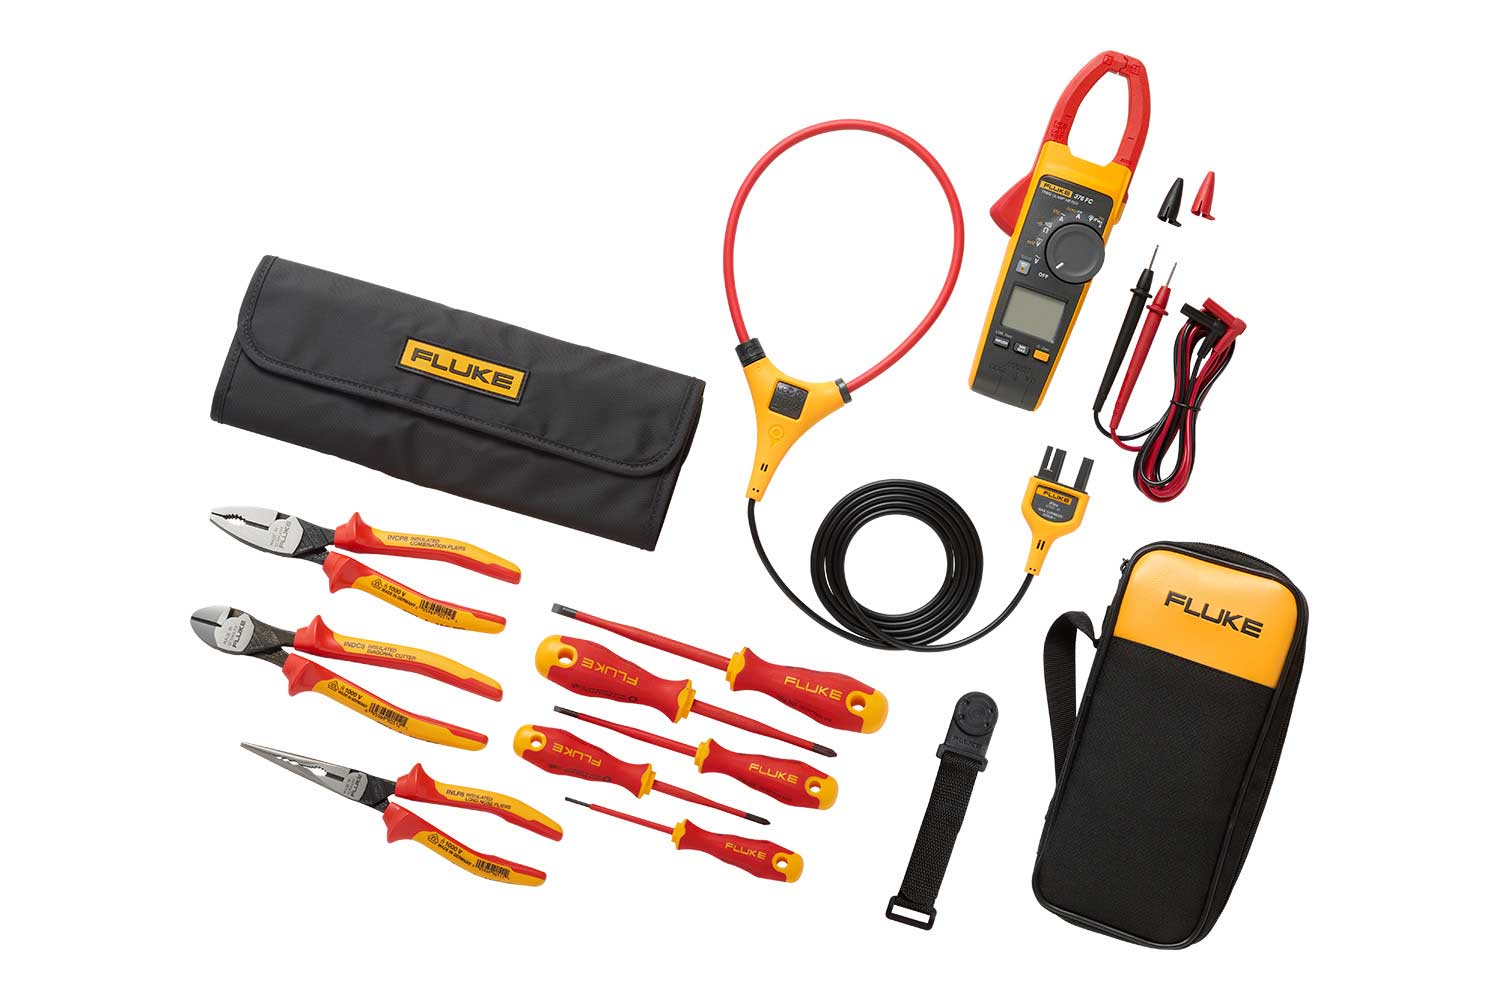 Fluke 376 FC True RMS AC/DC Clamp Meter Kit - Includes the IR-98